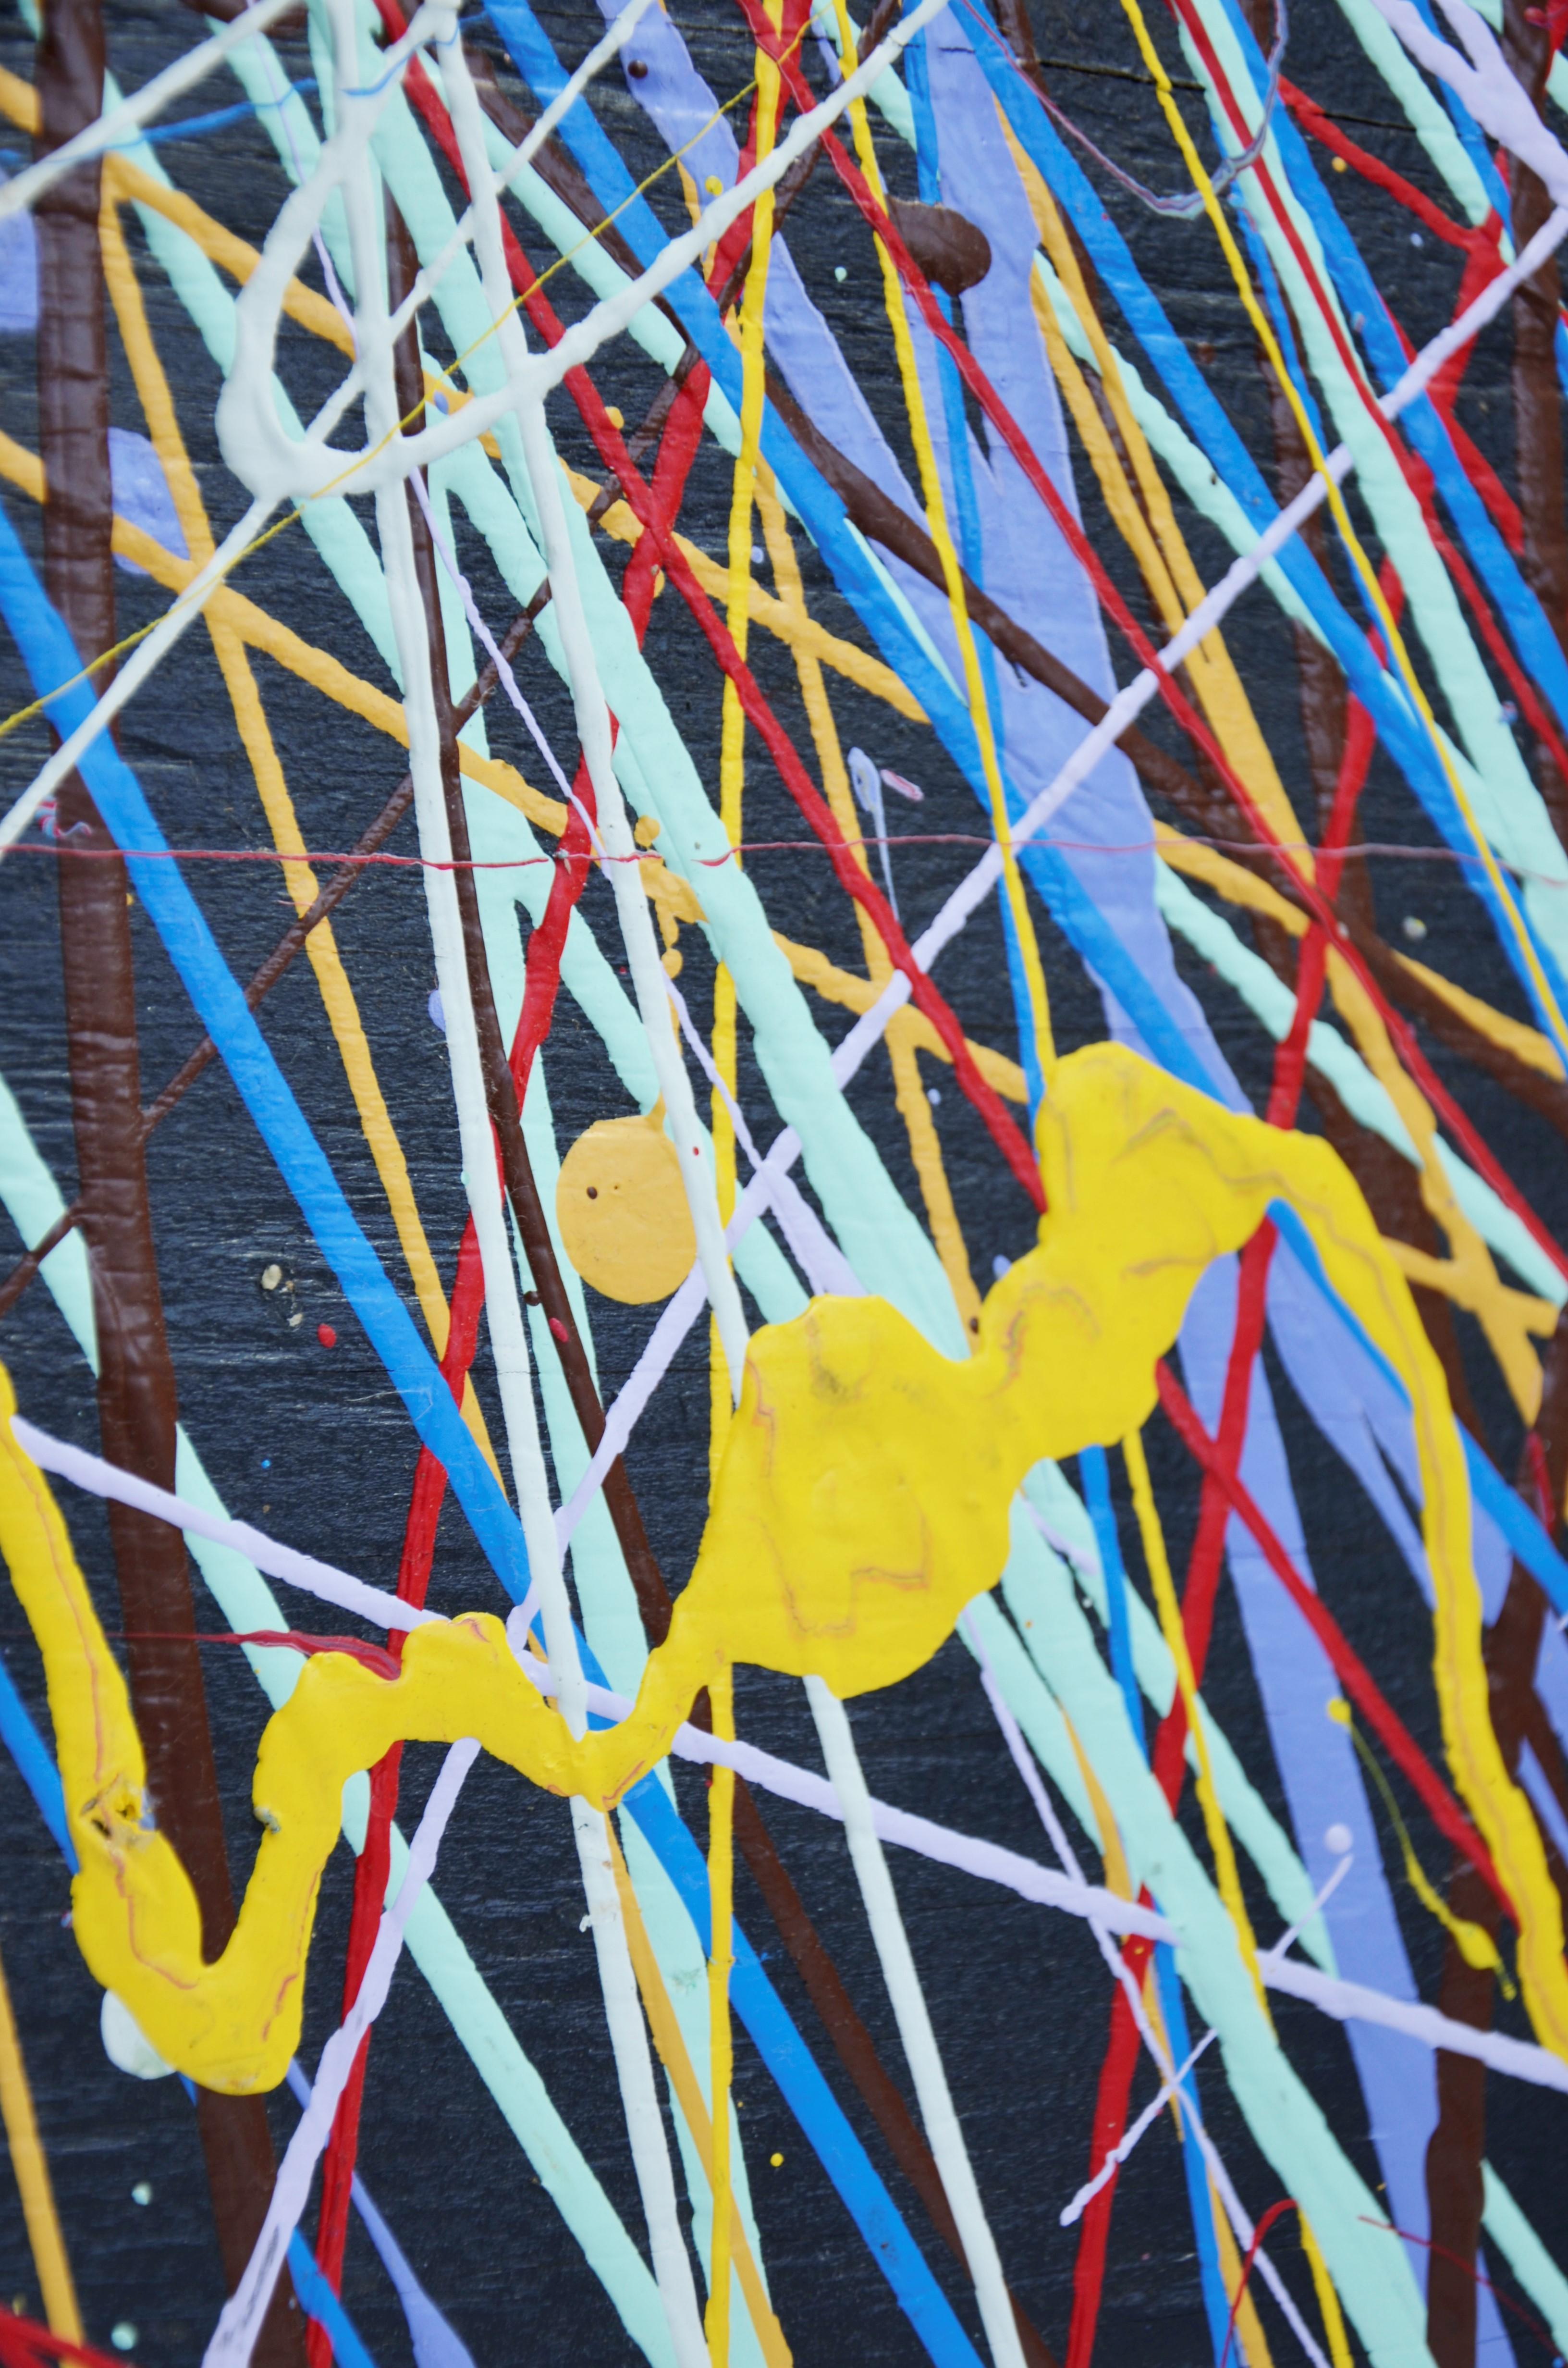 Pollock Style Yellow, Red, Blue & Black Splatter Abstract Oil Painting on Wood For Sale 3